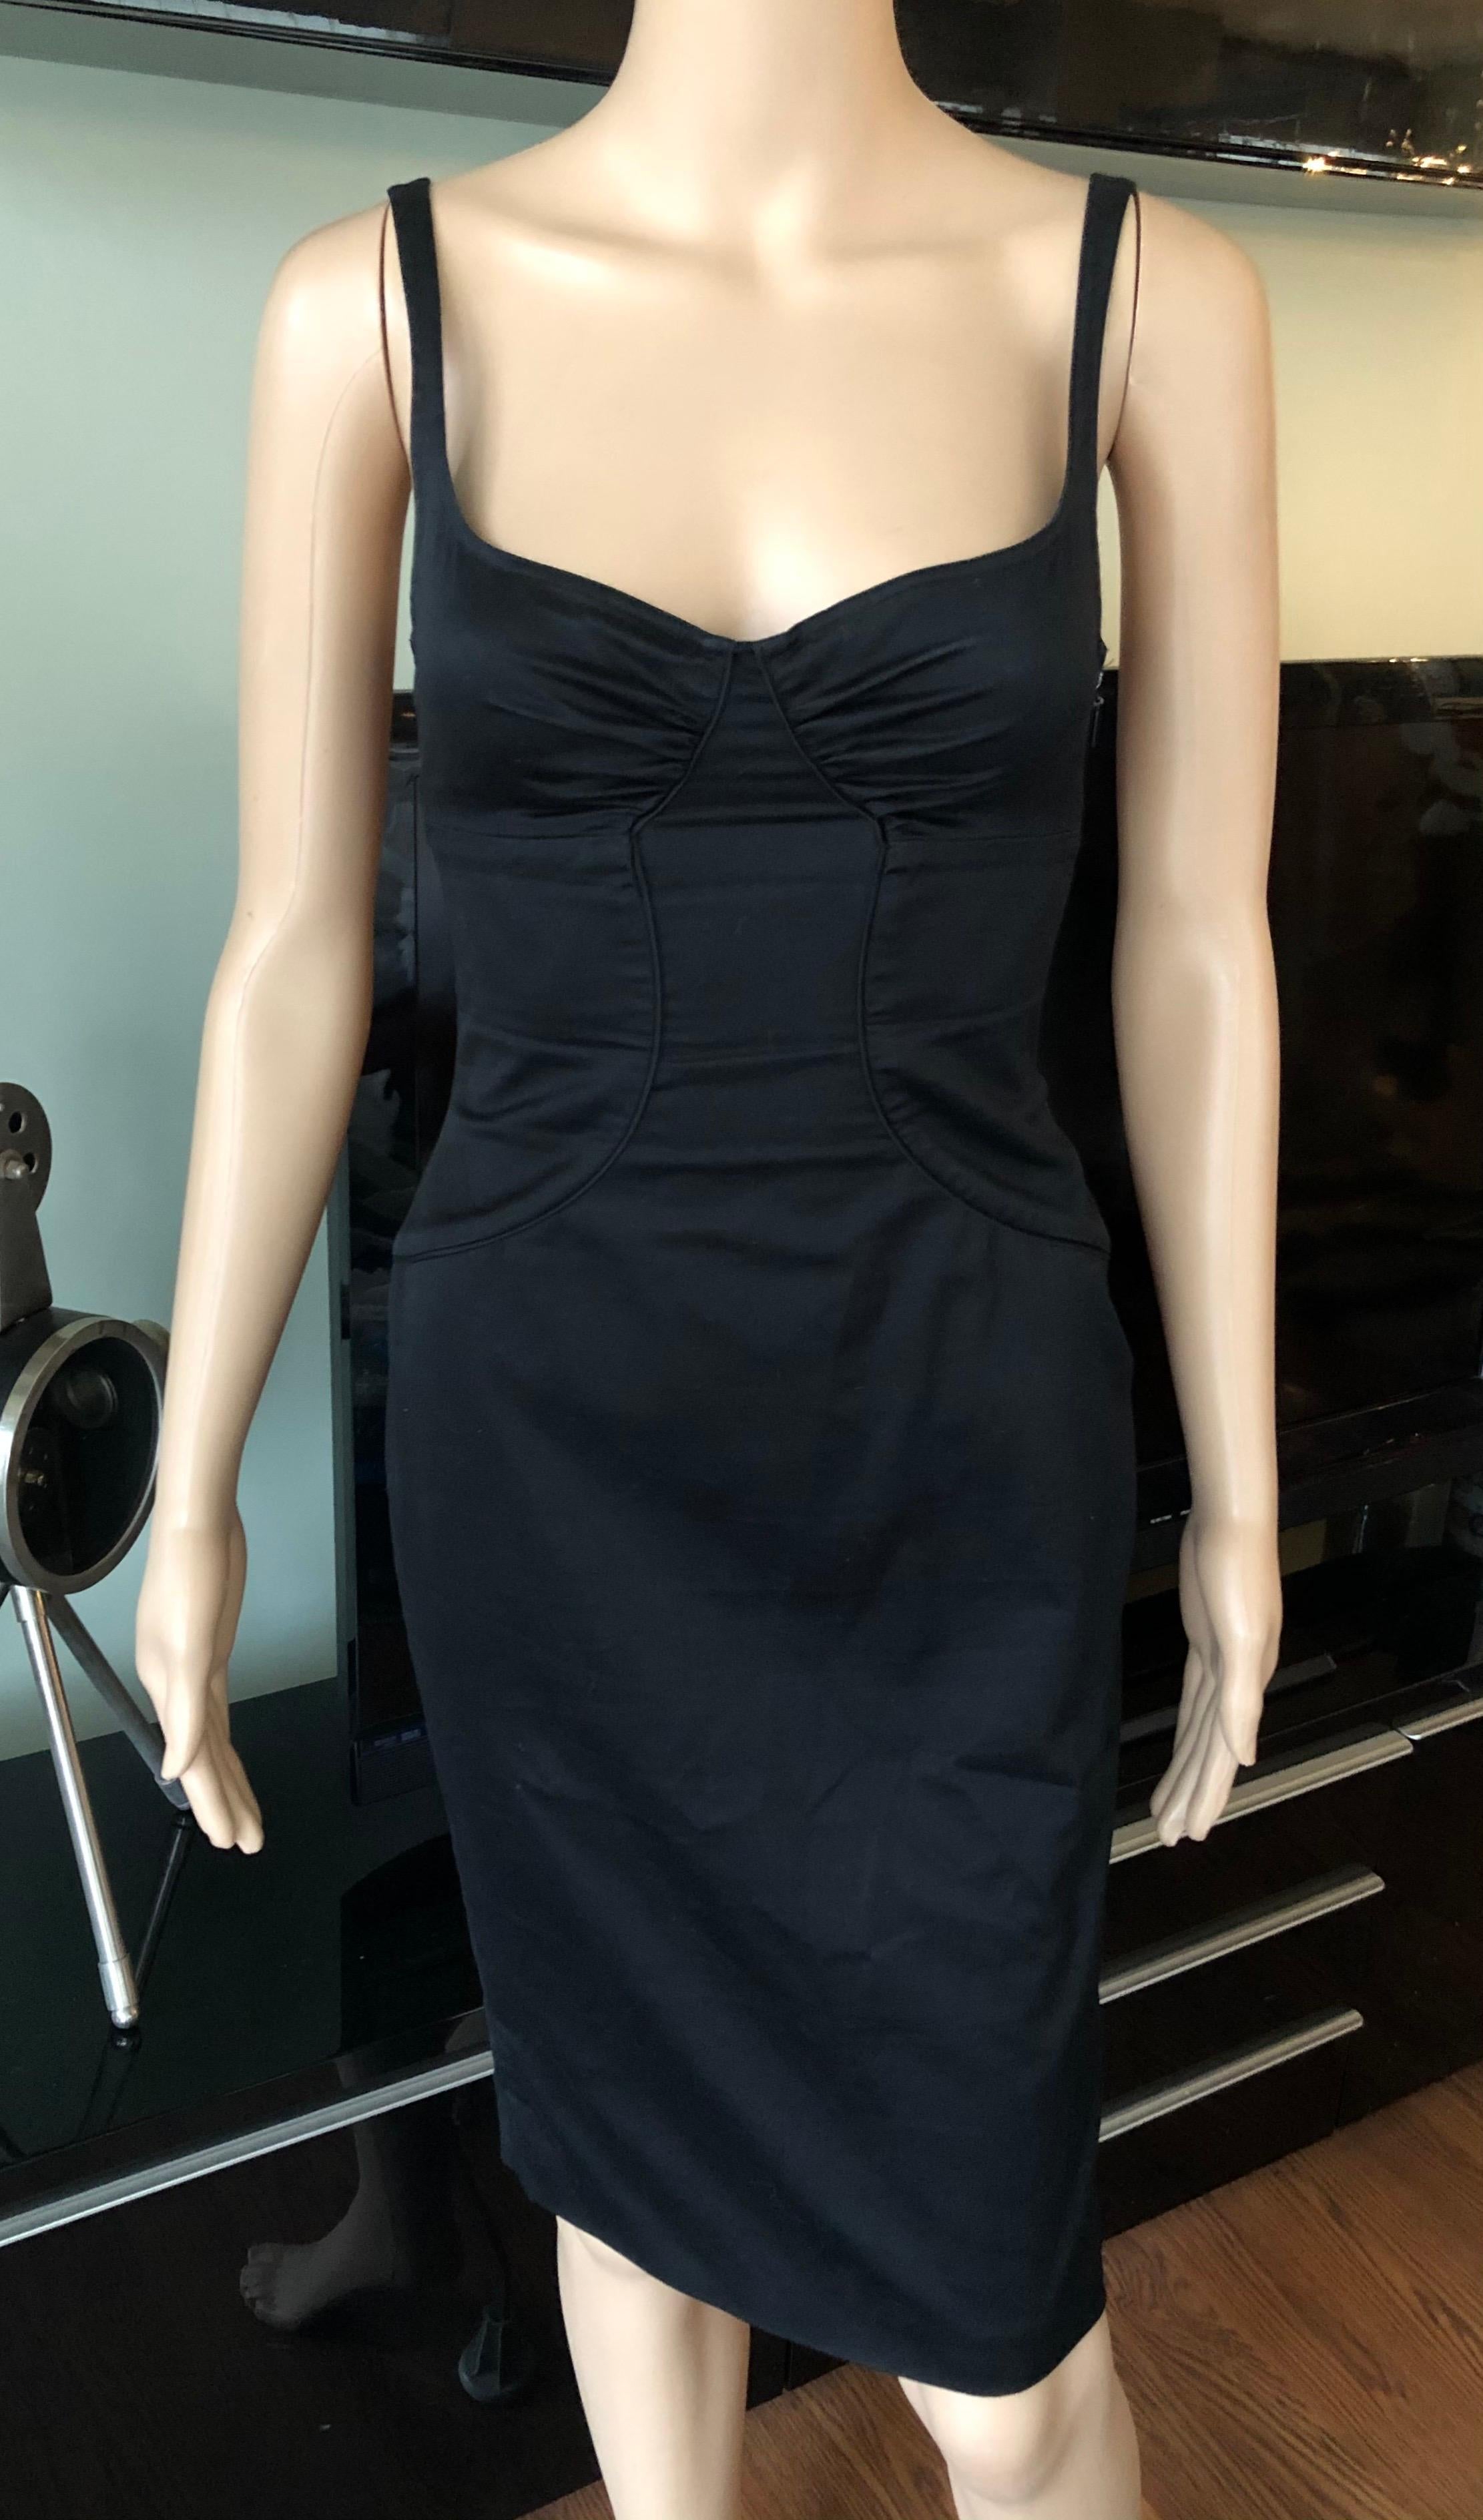 Tom Ford for Gucci 2003 Bustier Cutout Back Black Mini Dress IT 38

Gucci black mini dress with bustier neckline, cutout accent at back and concealed zip closure at side. 
